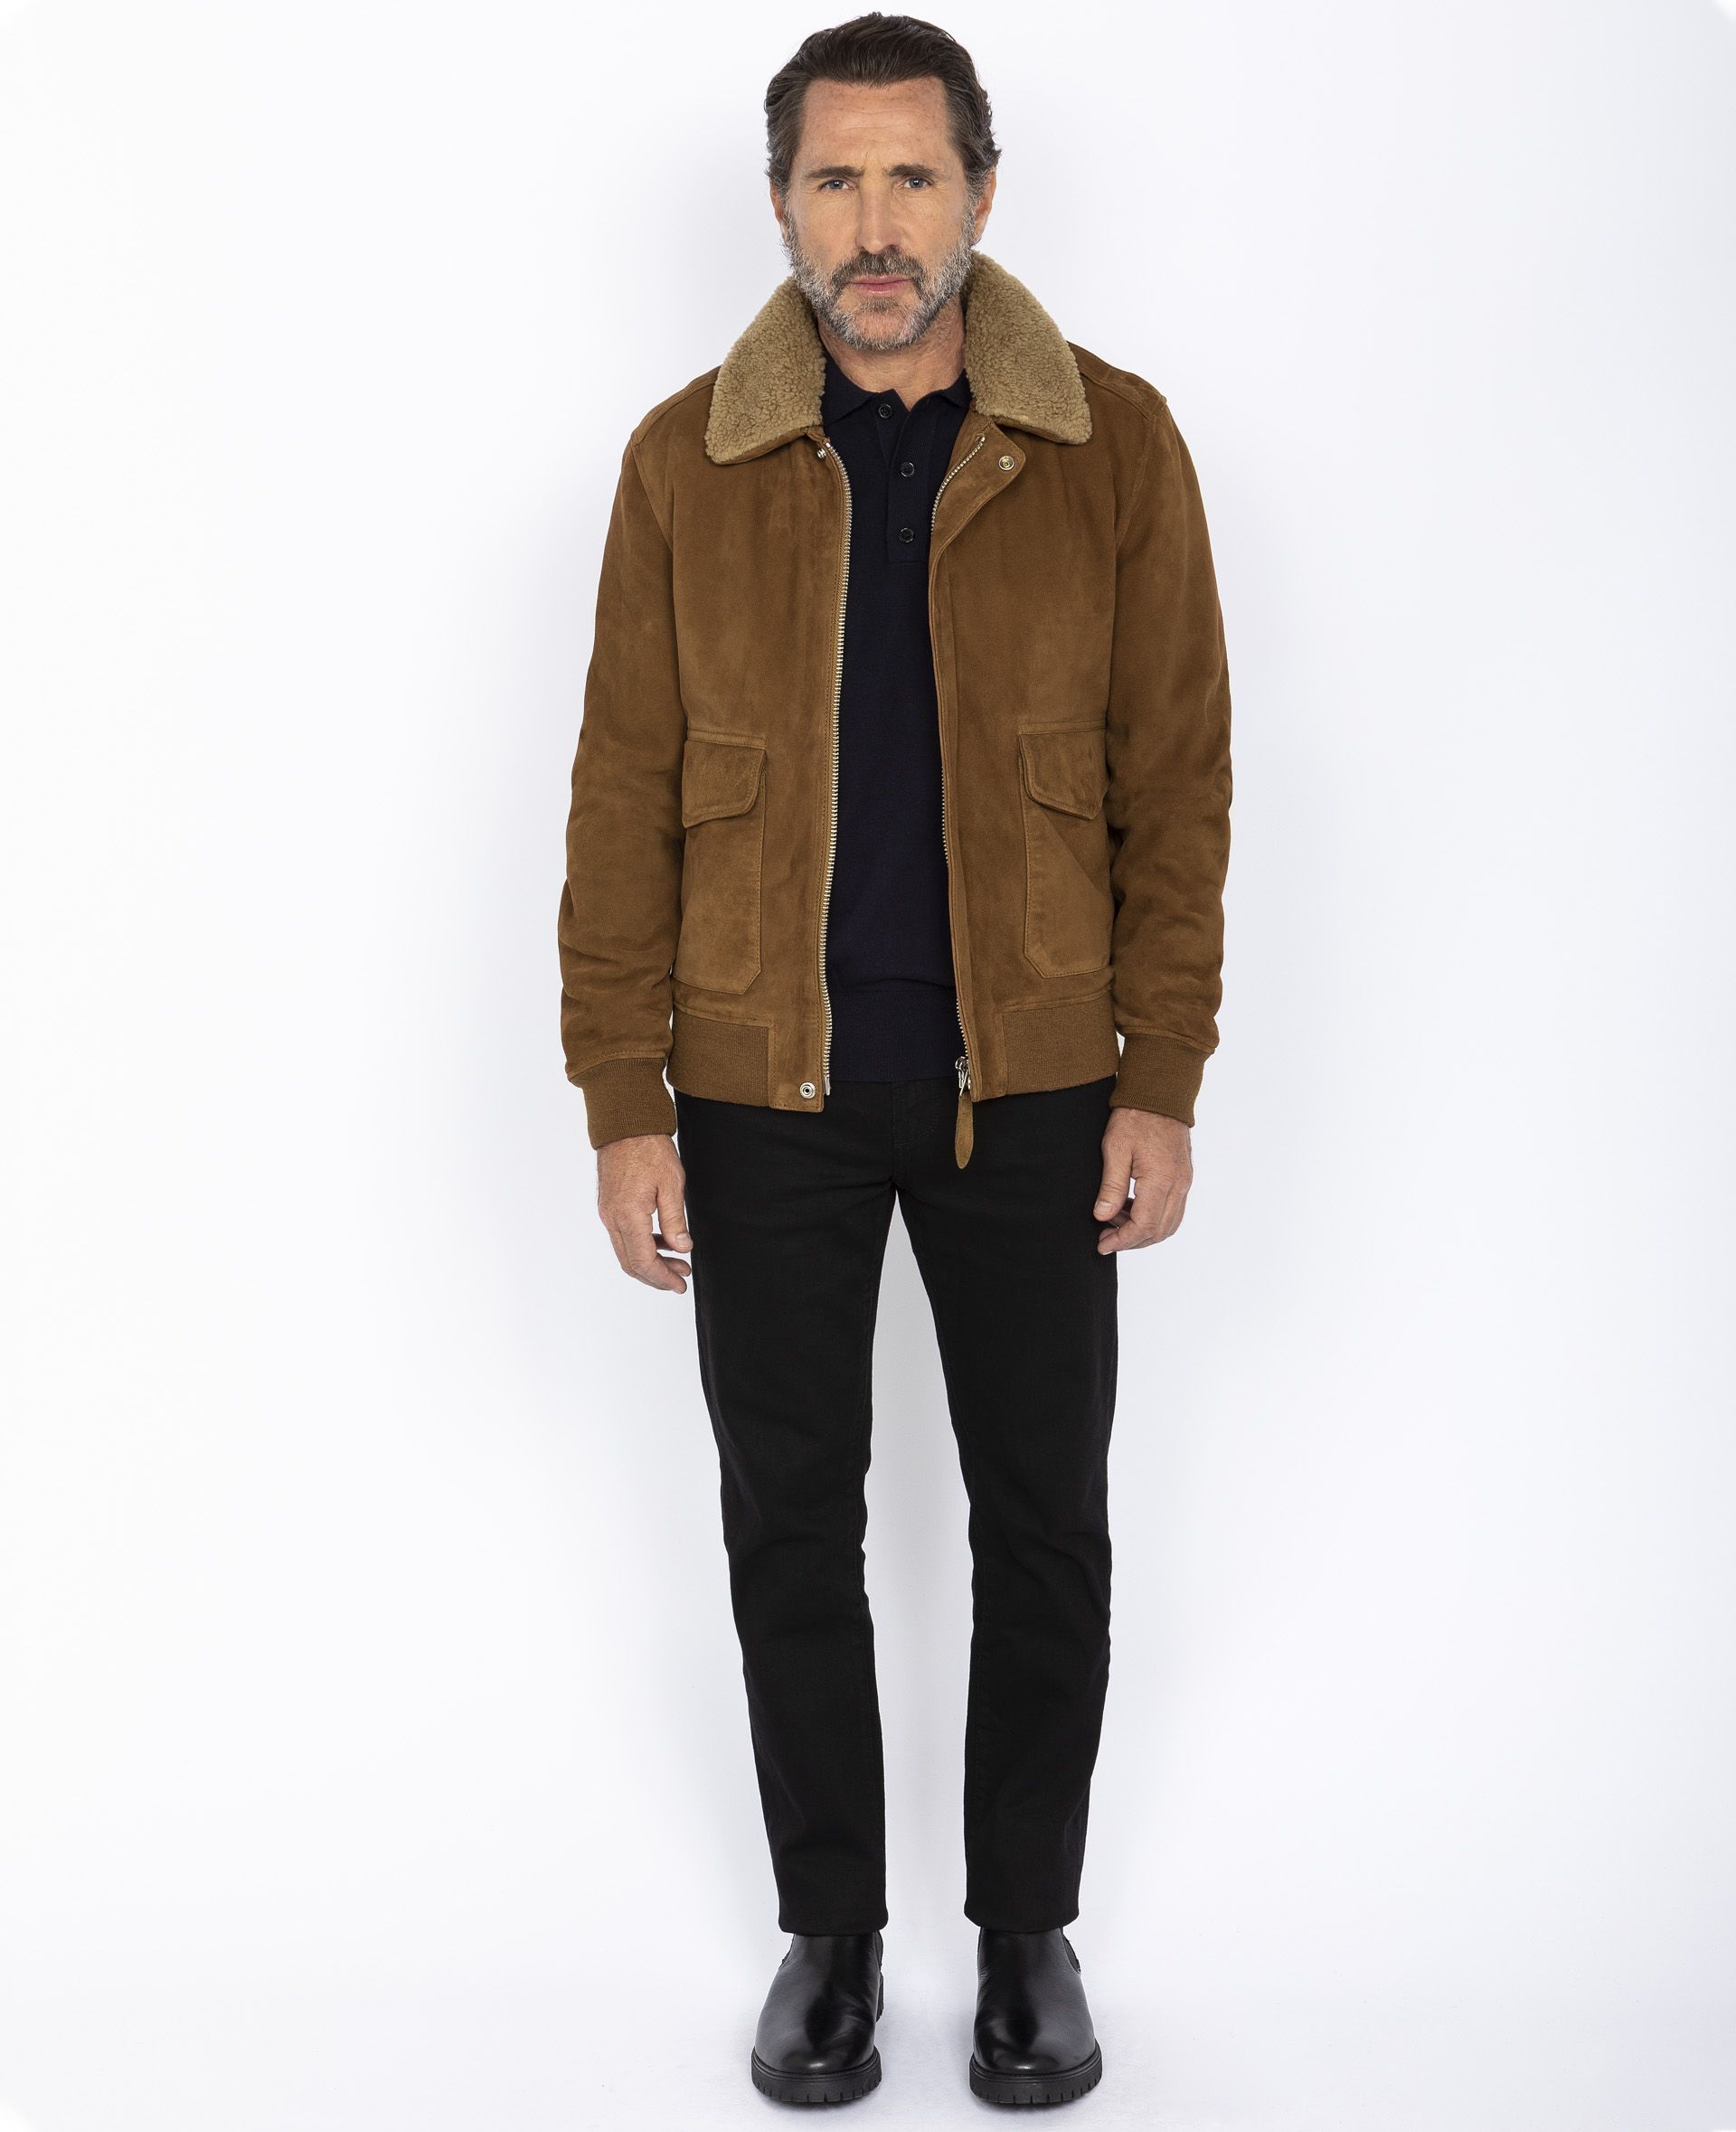 Buy A-2 Suede flight jacket, goat leather man 100% Goat leather